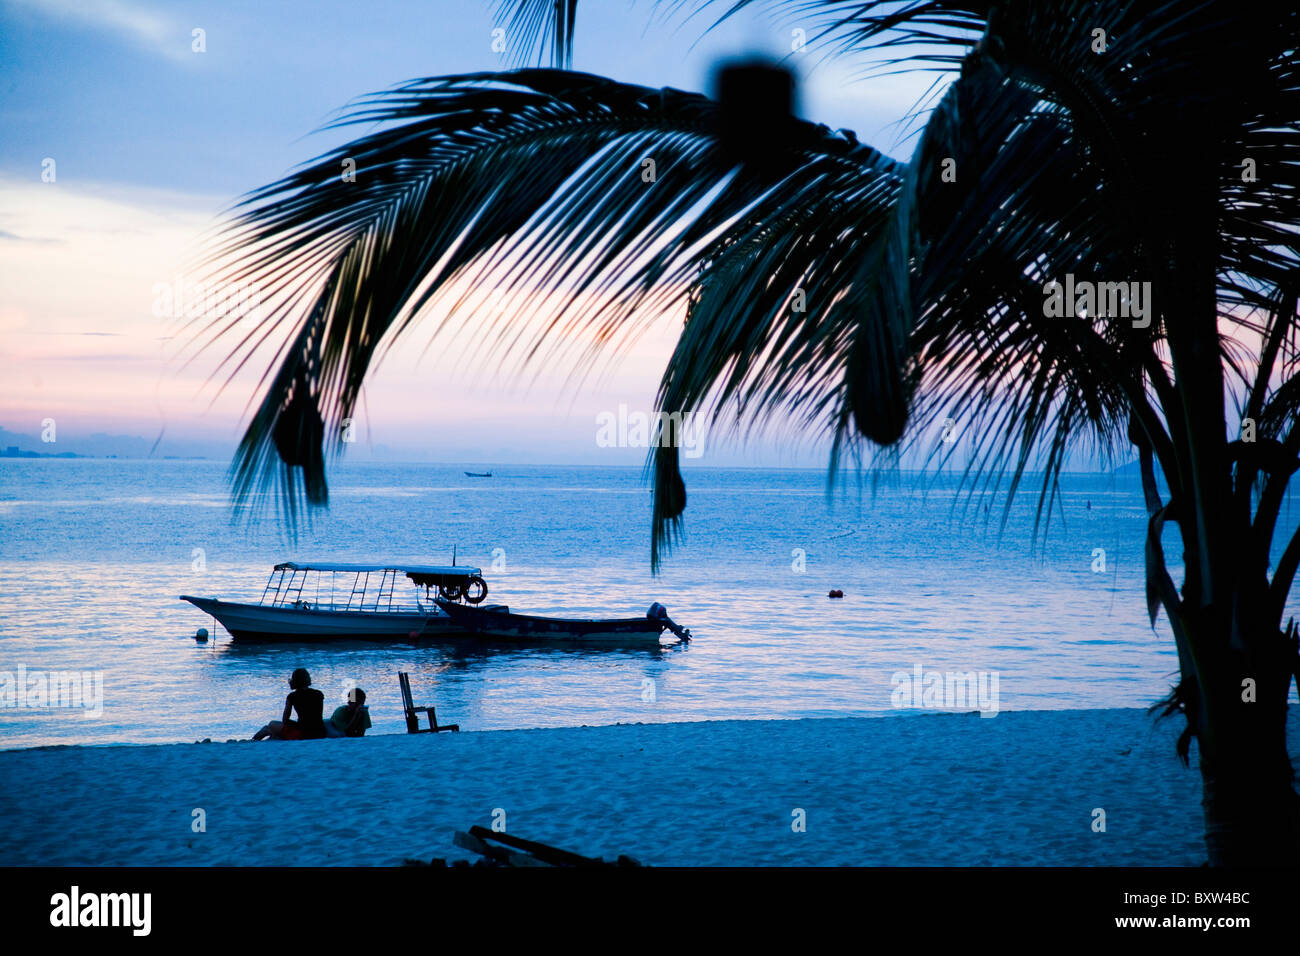 Silhouettes of people relaxing on beach at Dusk Banque D'Images